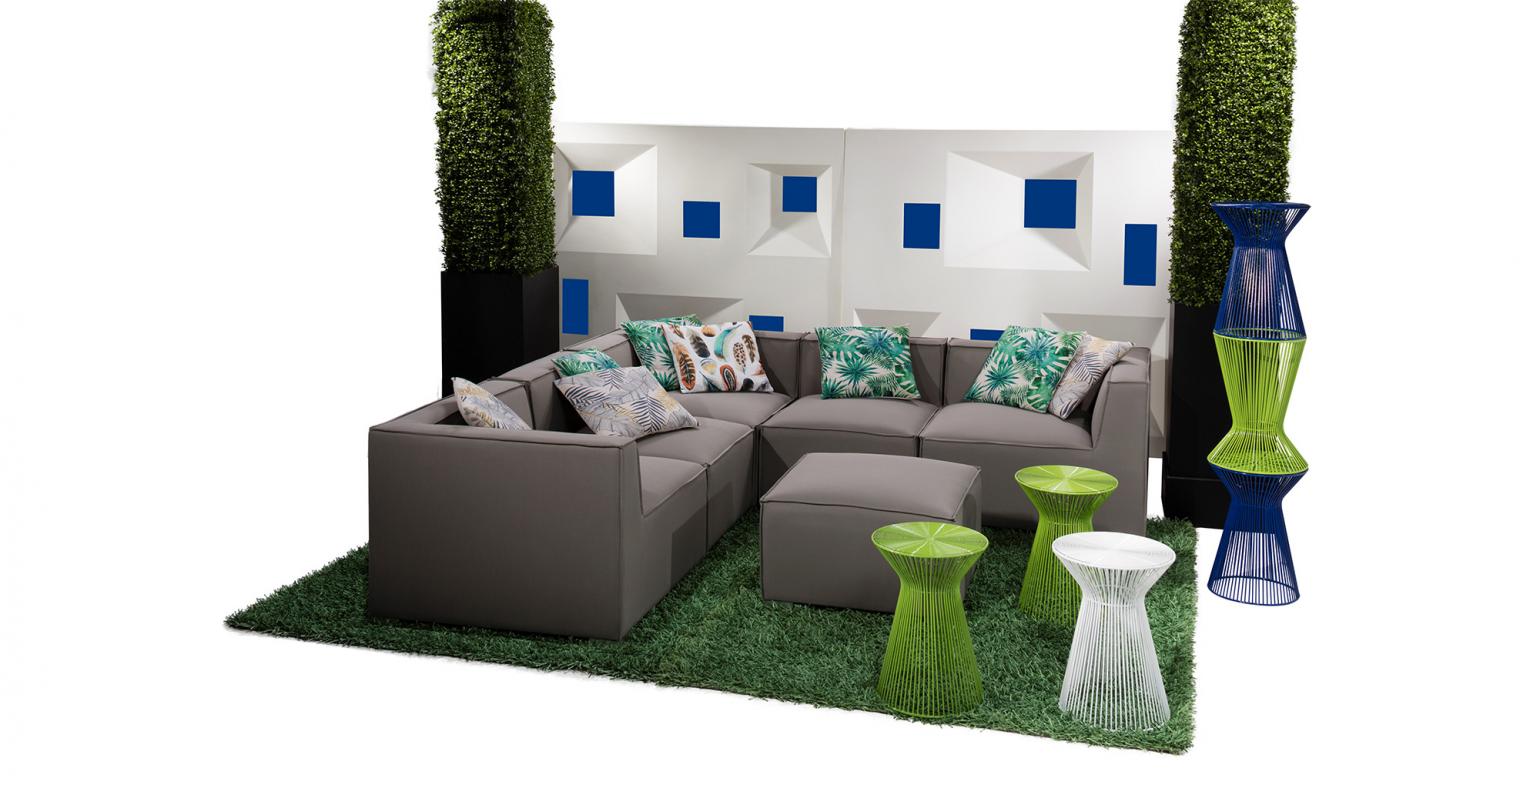 Top Outdoor Design Trends For Summer 2018 Special Events From Cort